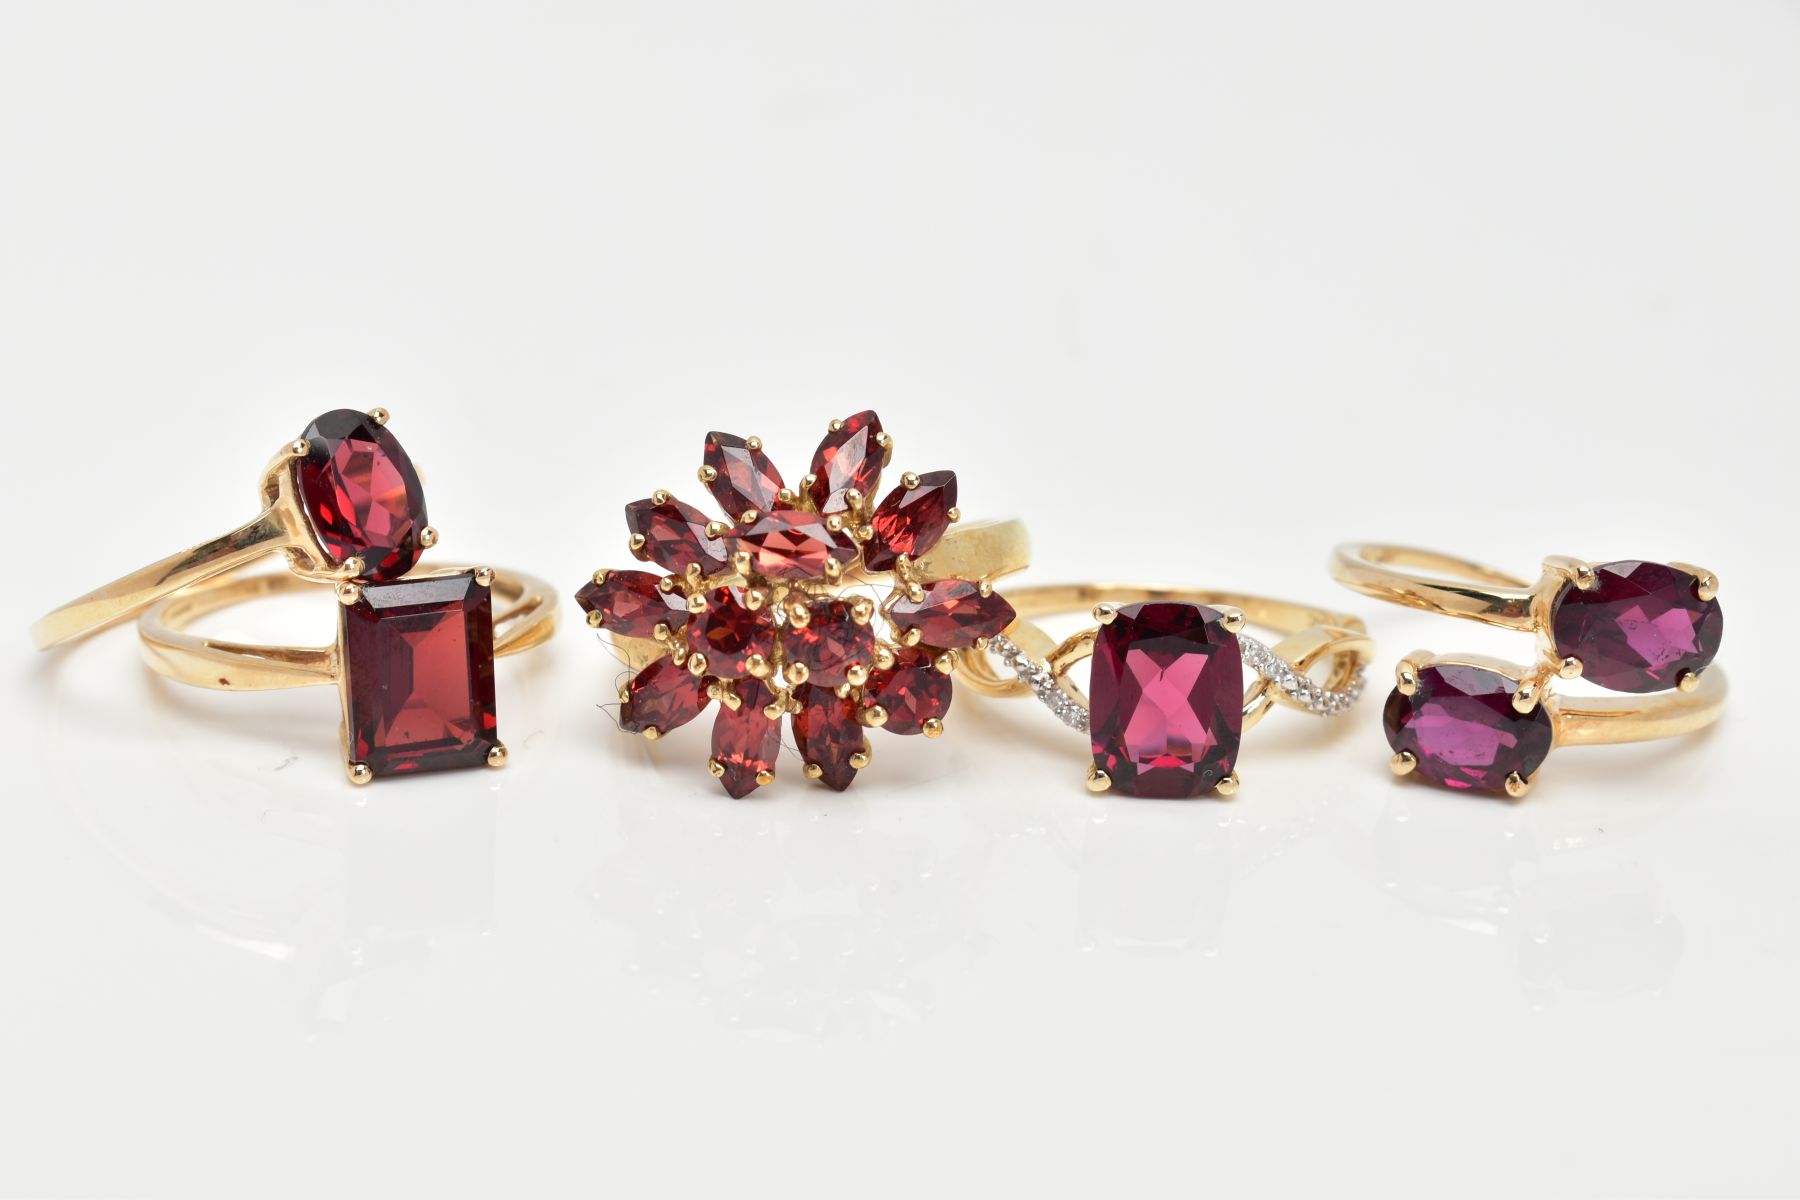 FIVE 9CT GOLD GEM SET DRESS RINGS, various designs, set with vary cut garnets, one also set with